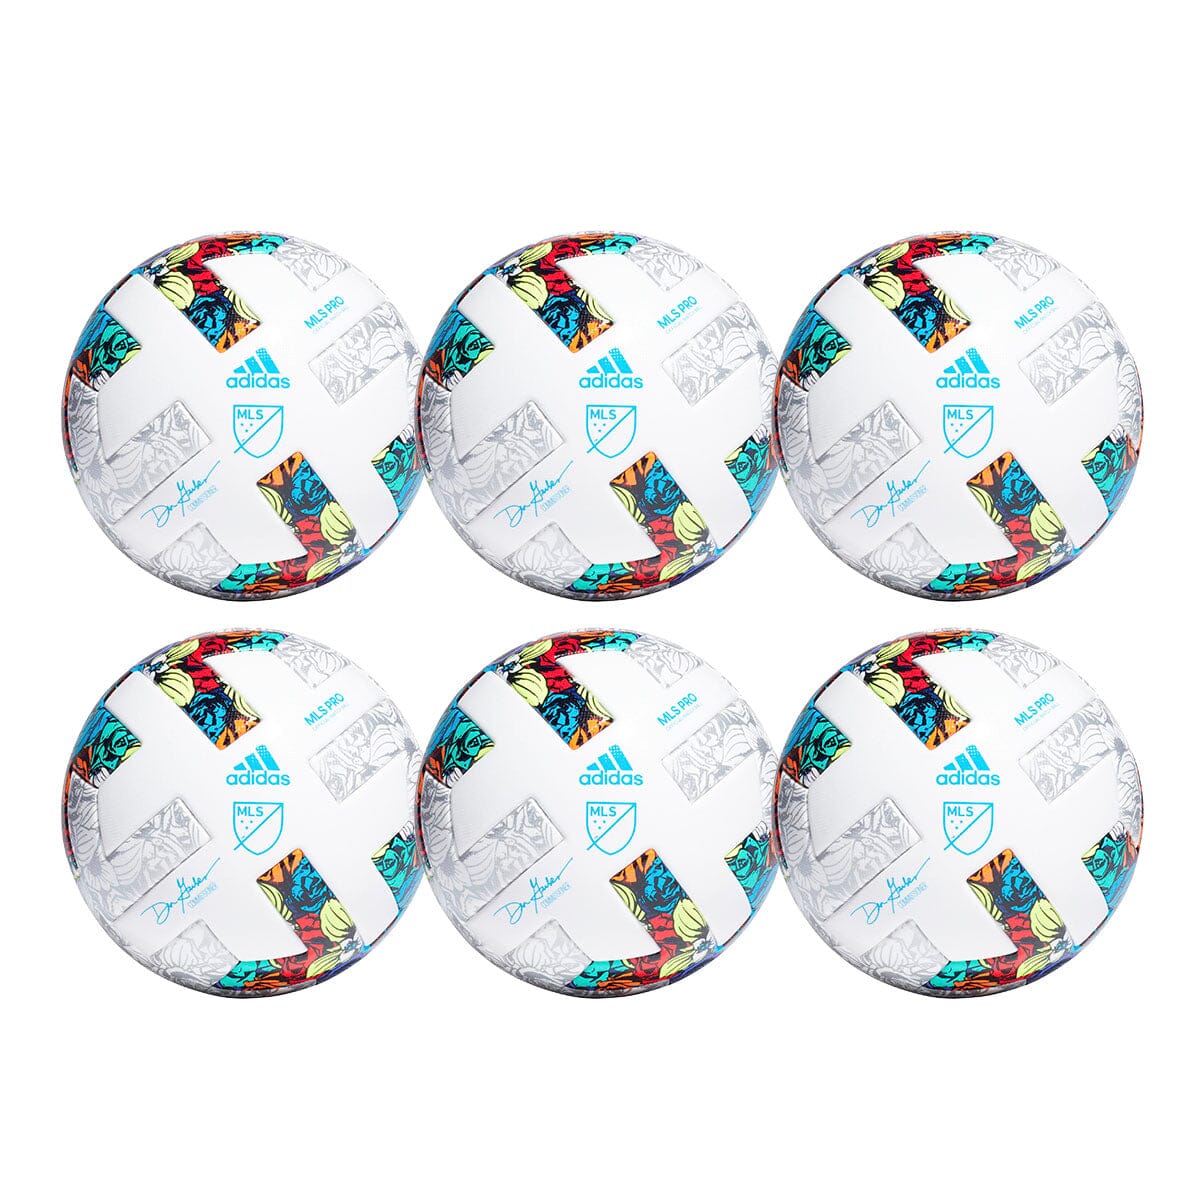 adidas MLS Pro Match Ball 2022 White/Multi Color - 6 Pack | H57824 Soccer Ball Adidas 5 White / Solar Yellow / Power Blue 